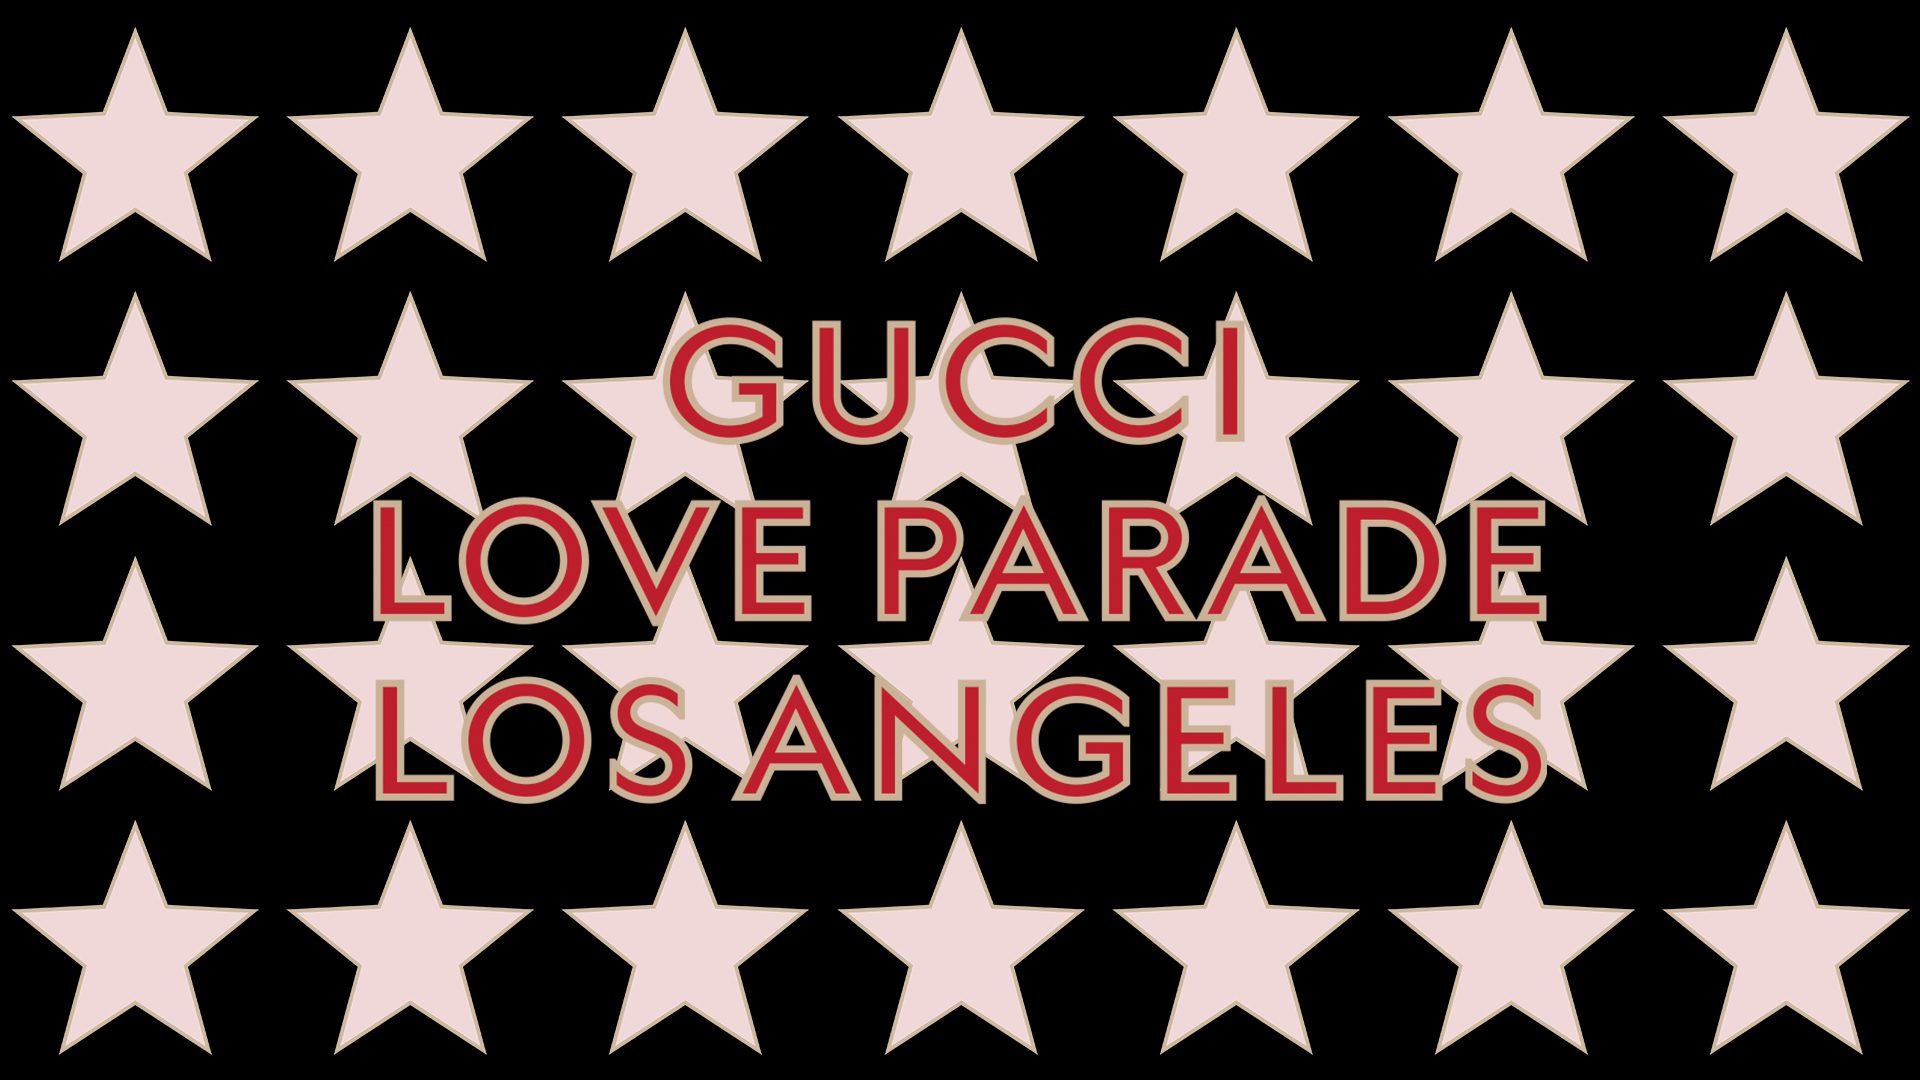 Watch: Stream the ‘Gucci Love Parade’ fashion show in Los Angeles